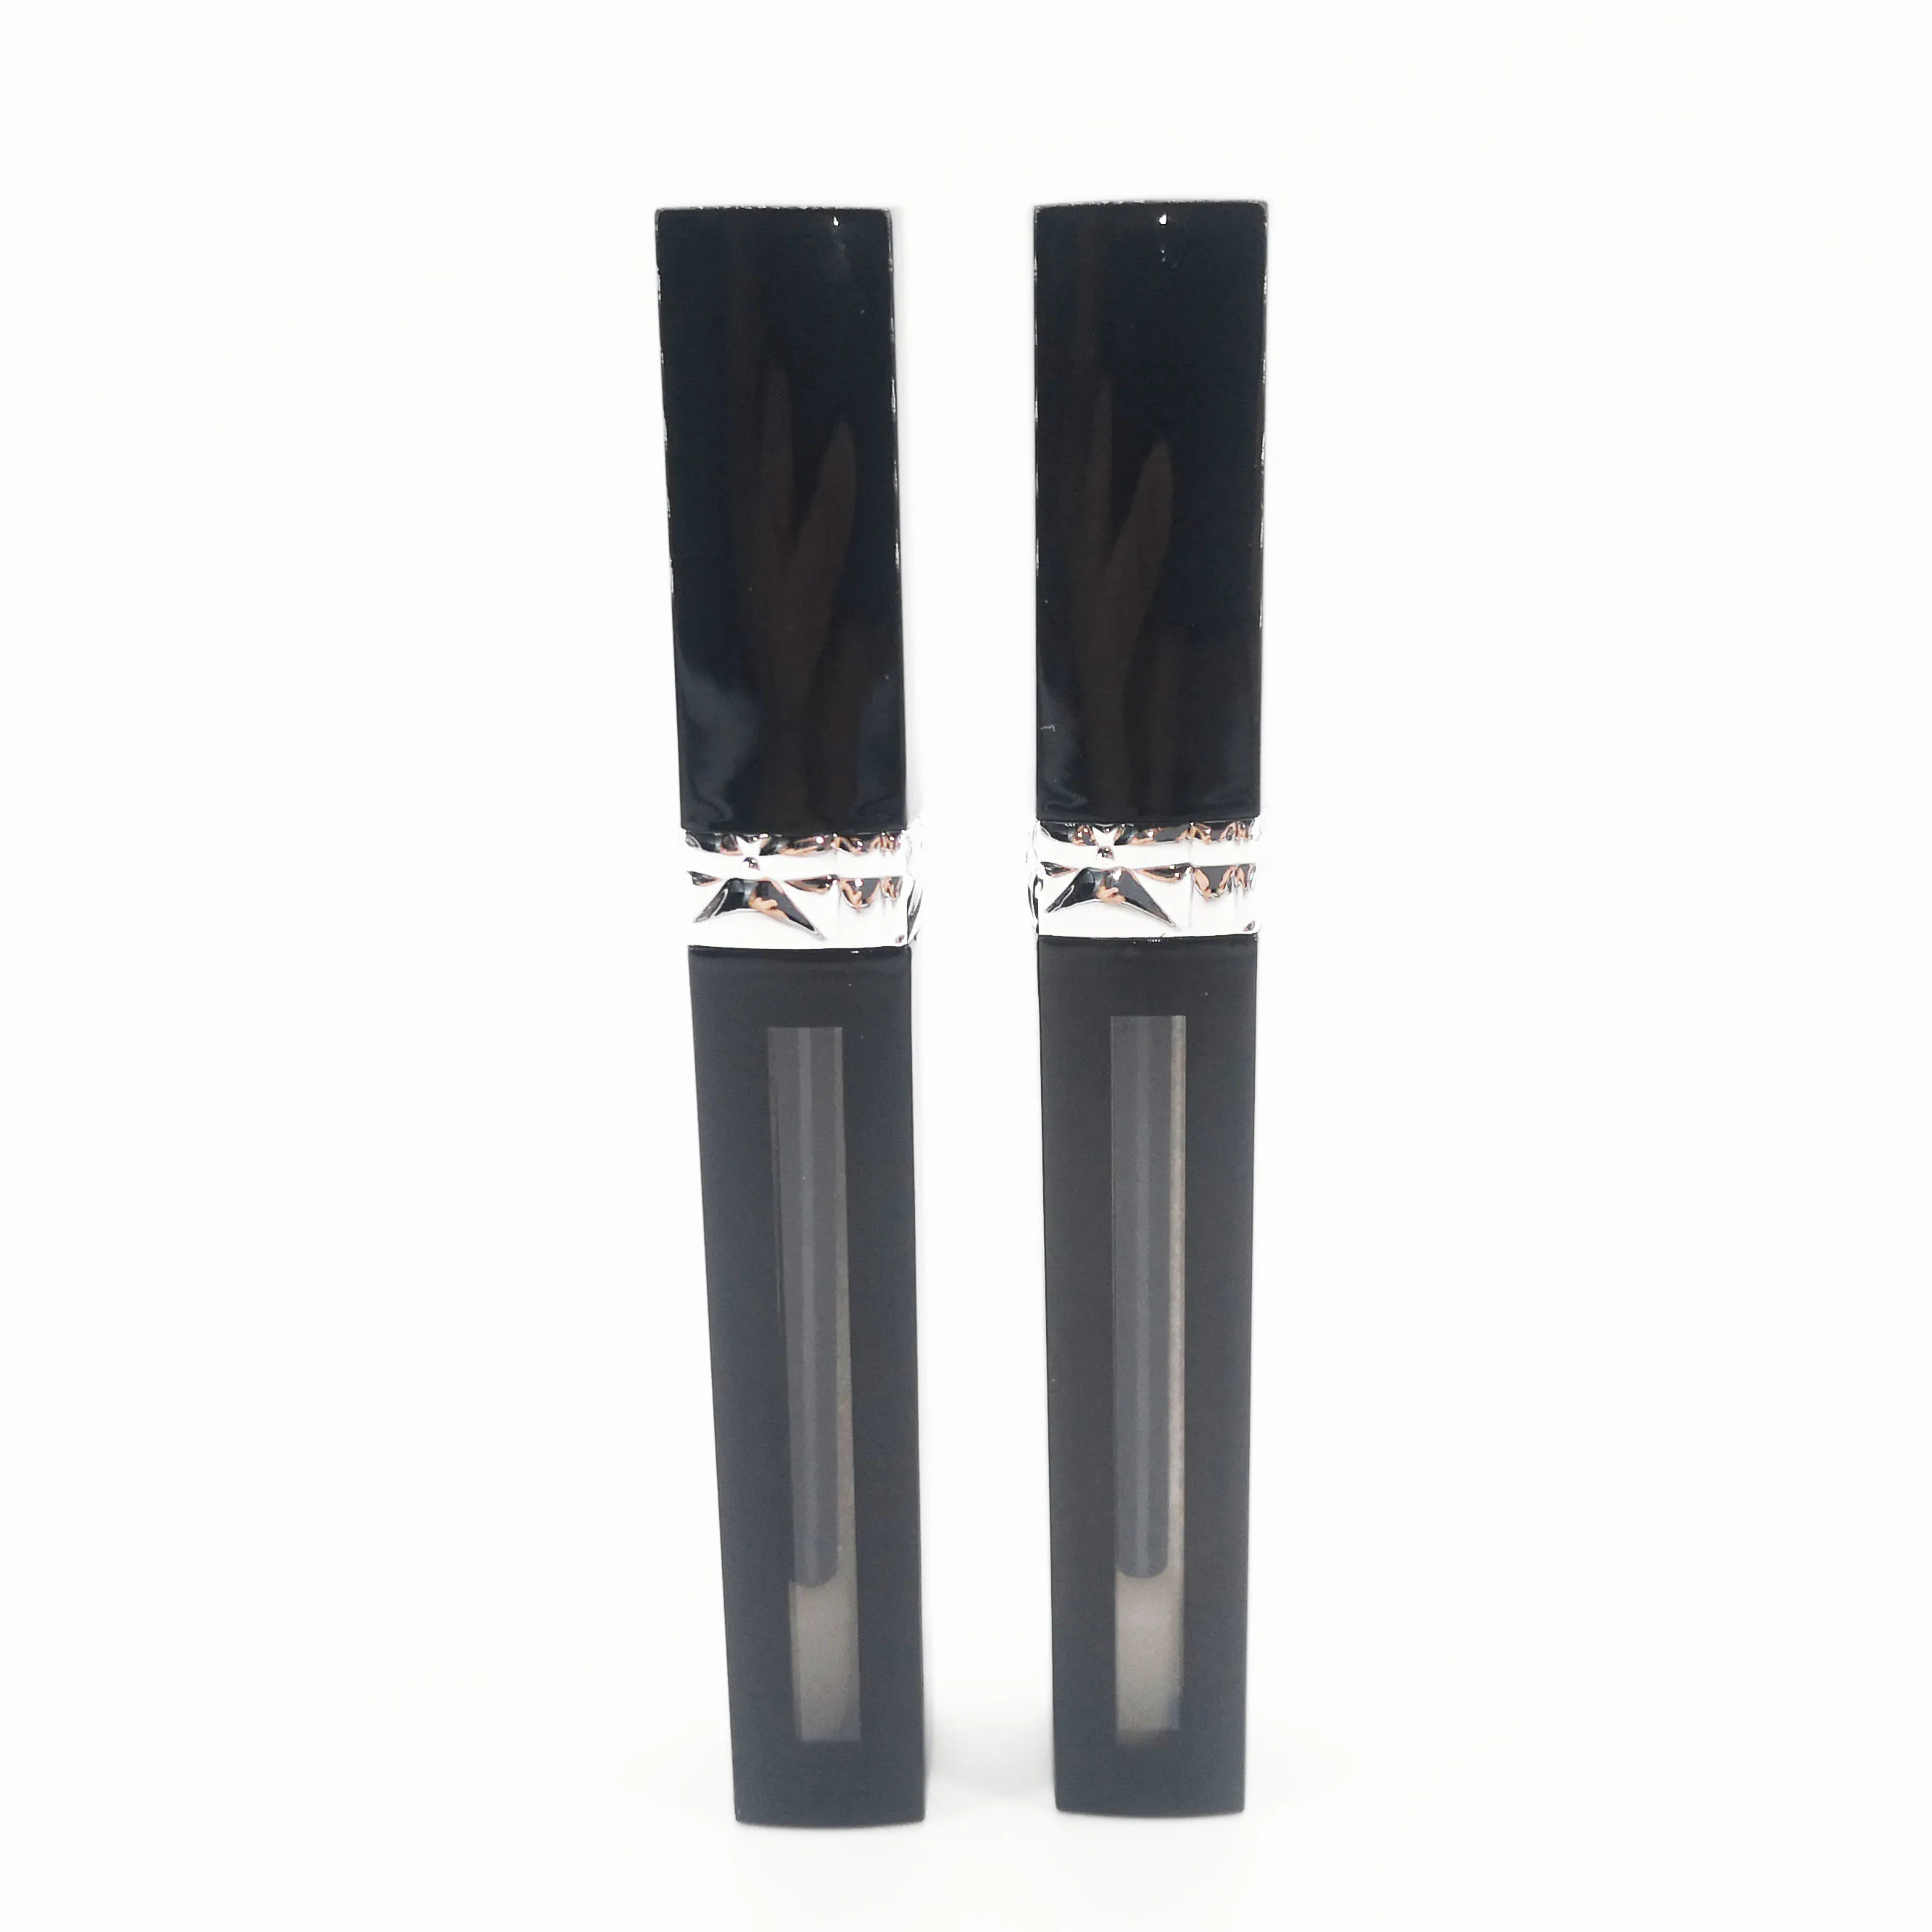 6 Ml Wholesale Unique Lip Gloss Tubes Empty Lipgloss Container Wand ...